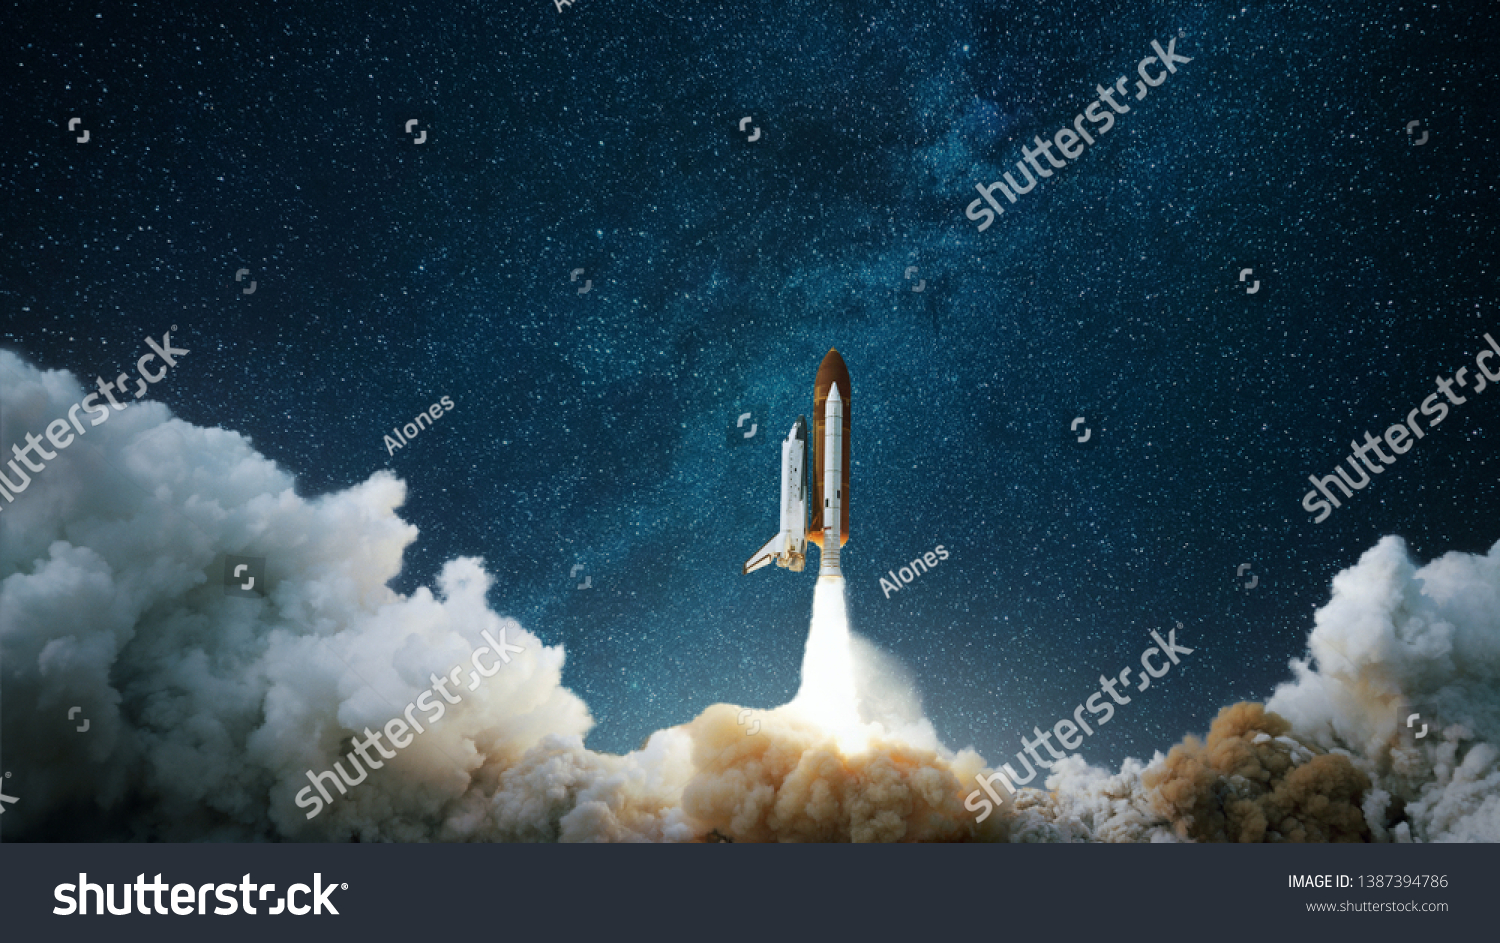 Spaceship takes off into the starry sky. Rocket starts into space. Concept #1387394786